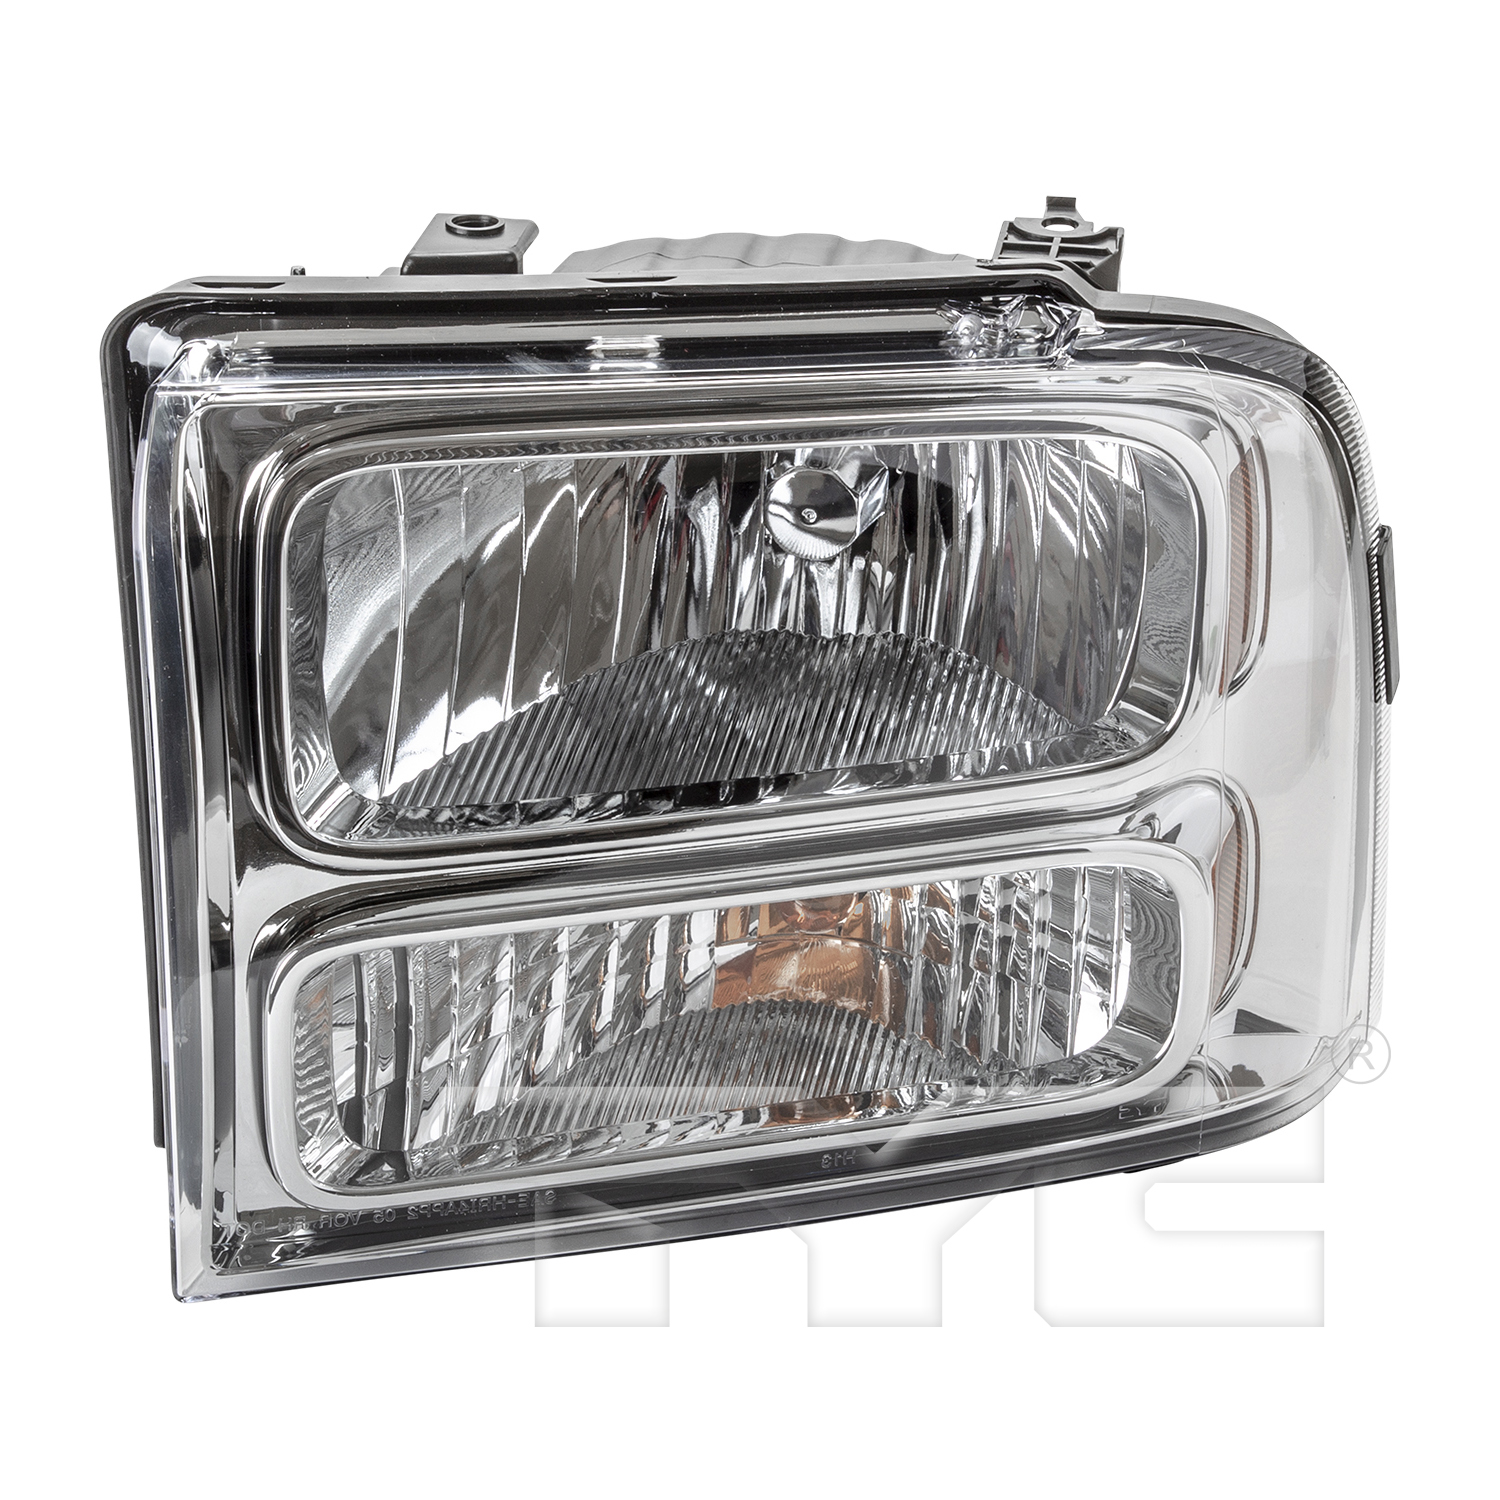 Aftermarket HEADLIGHTS for FORD - F-350 SUPER DUTY, F-350 SUPER DUTY,04-07,LT Headlamp assy composite